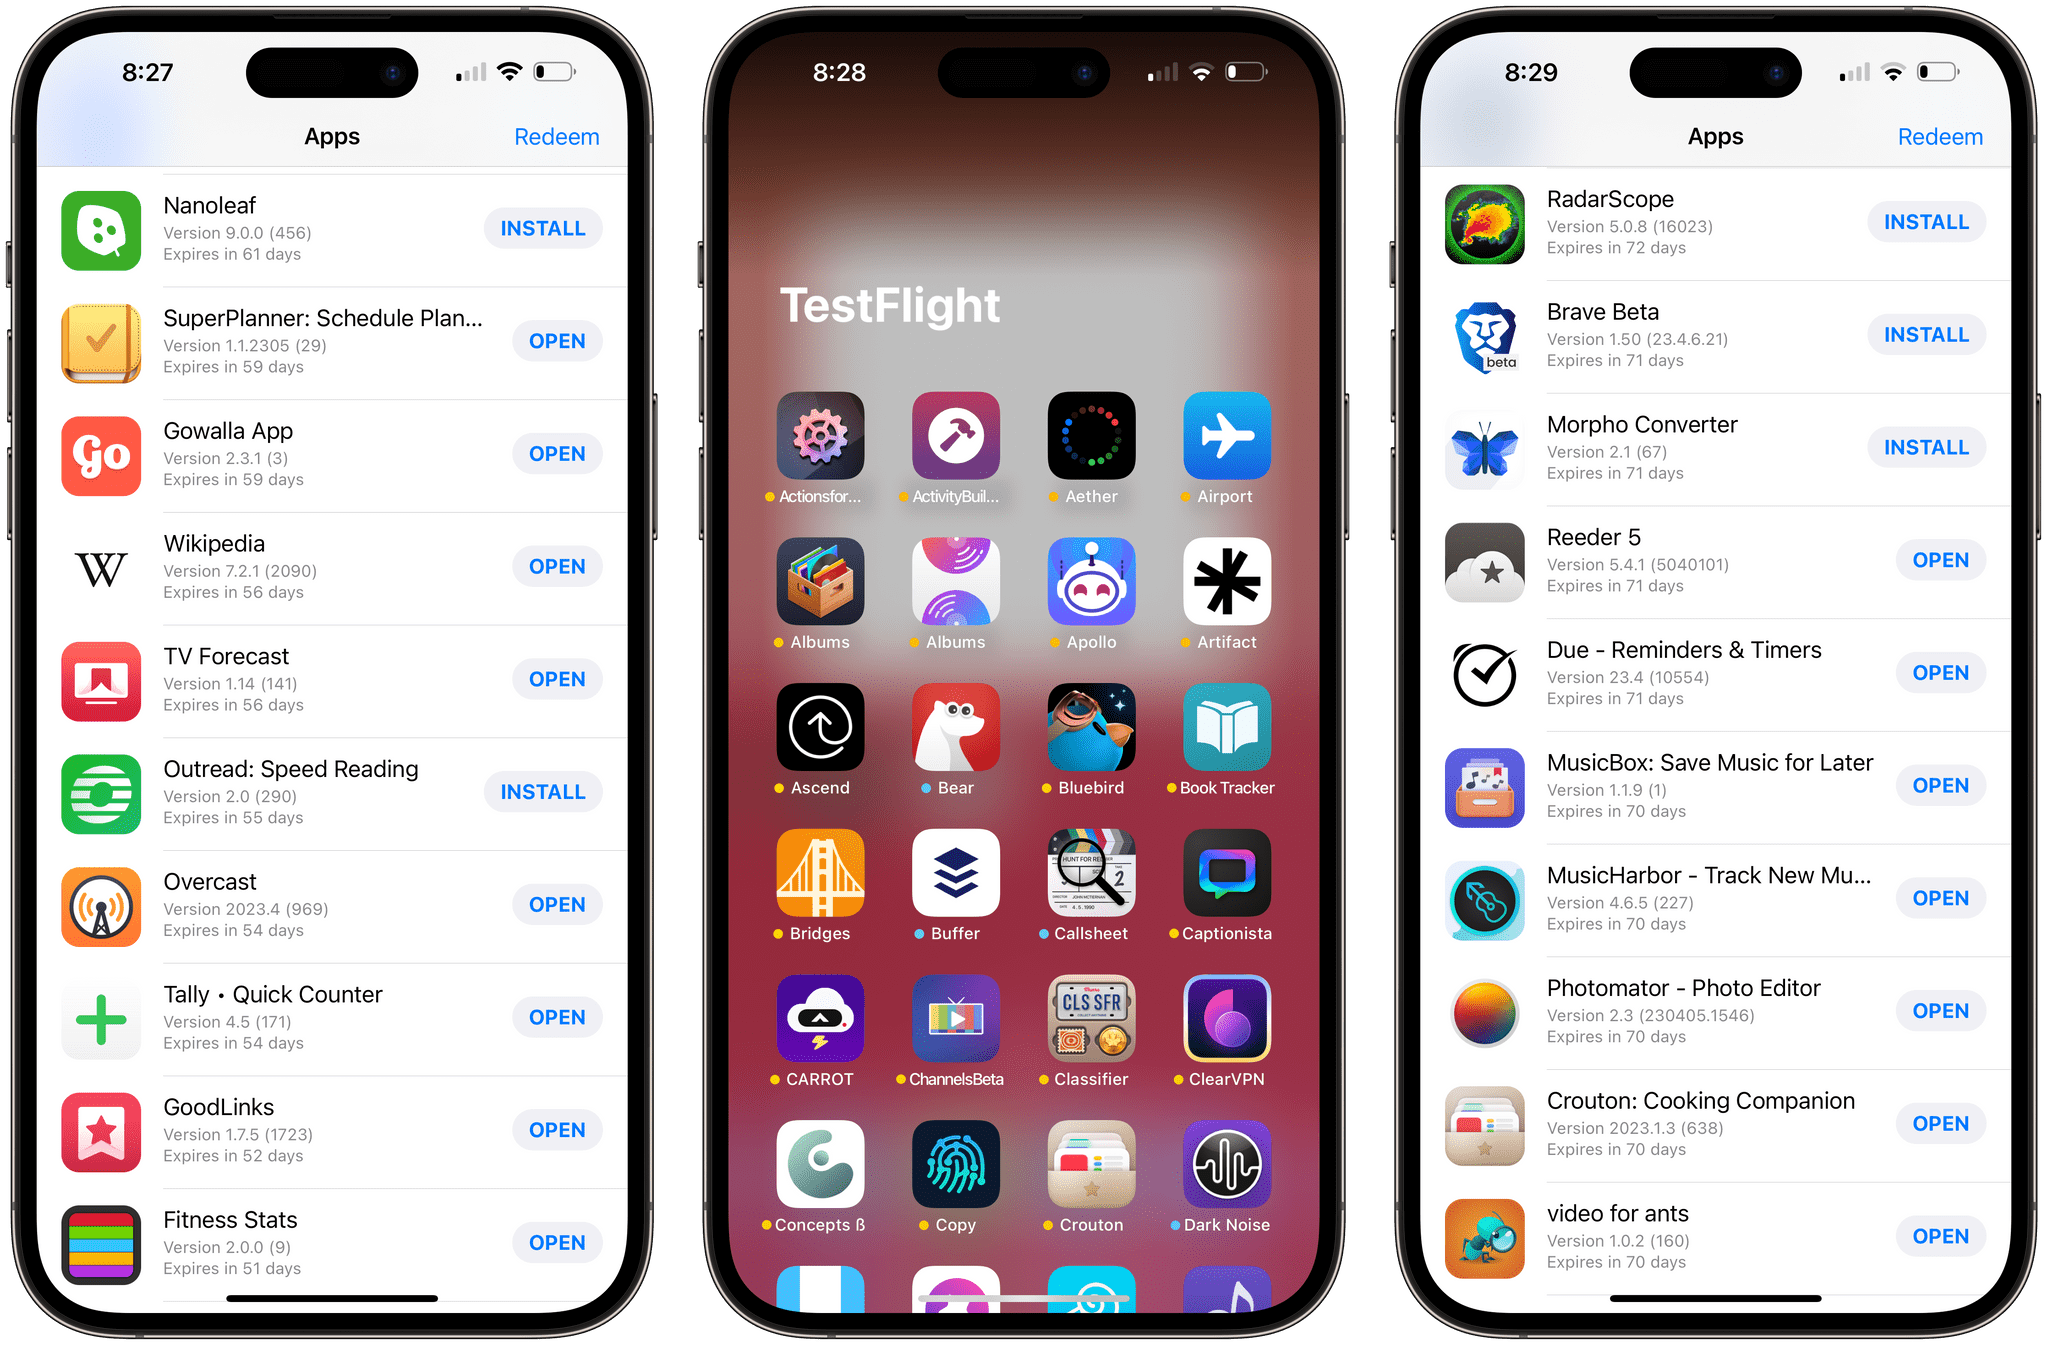 I like the TestFlight section in the App Library, but users should be able to turn it off.